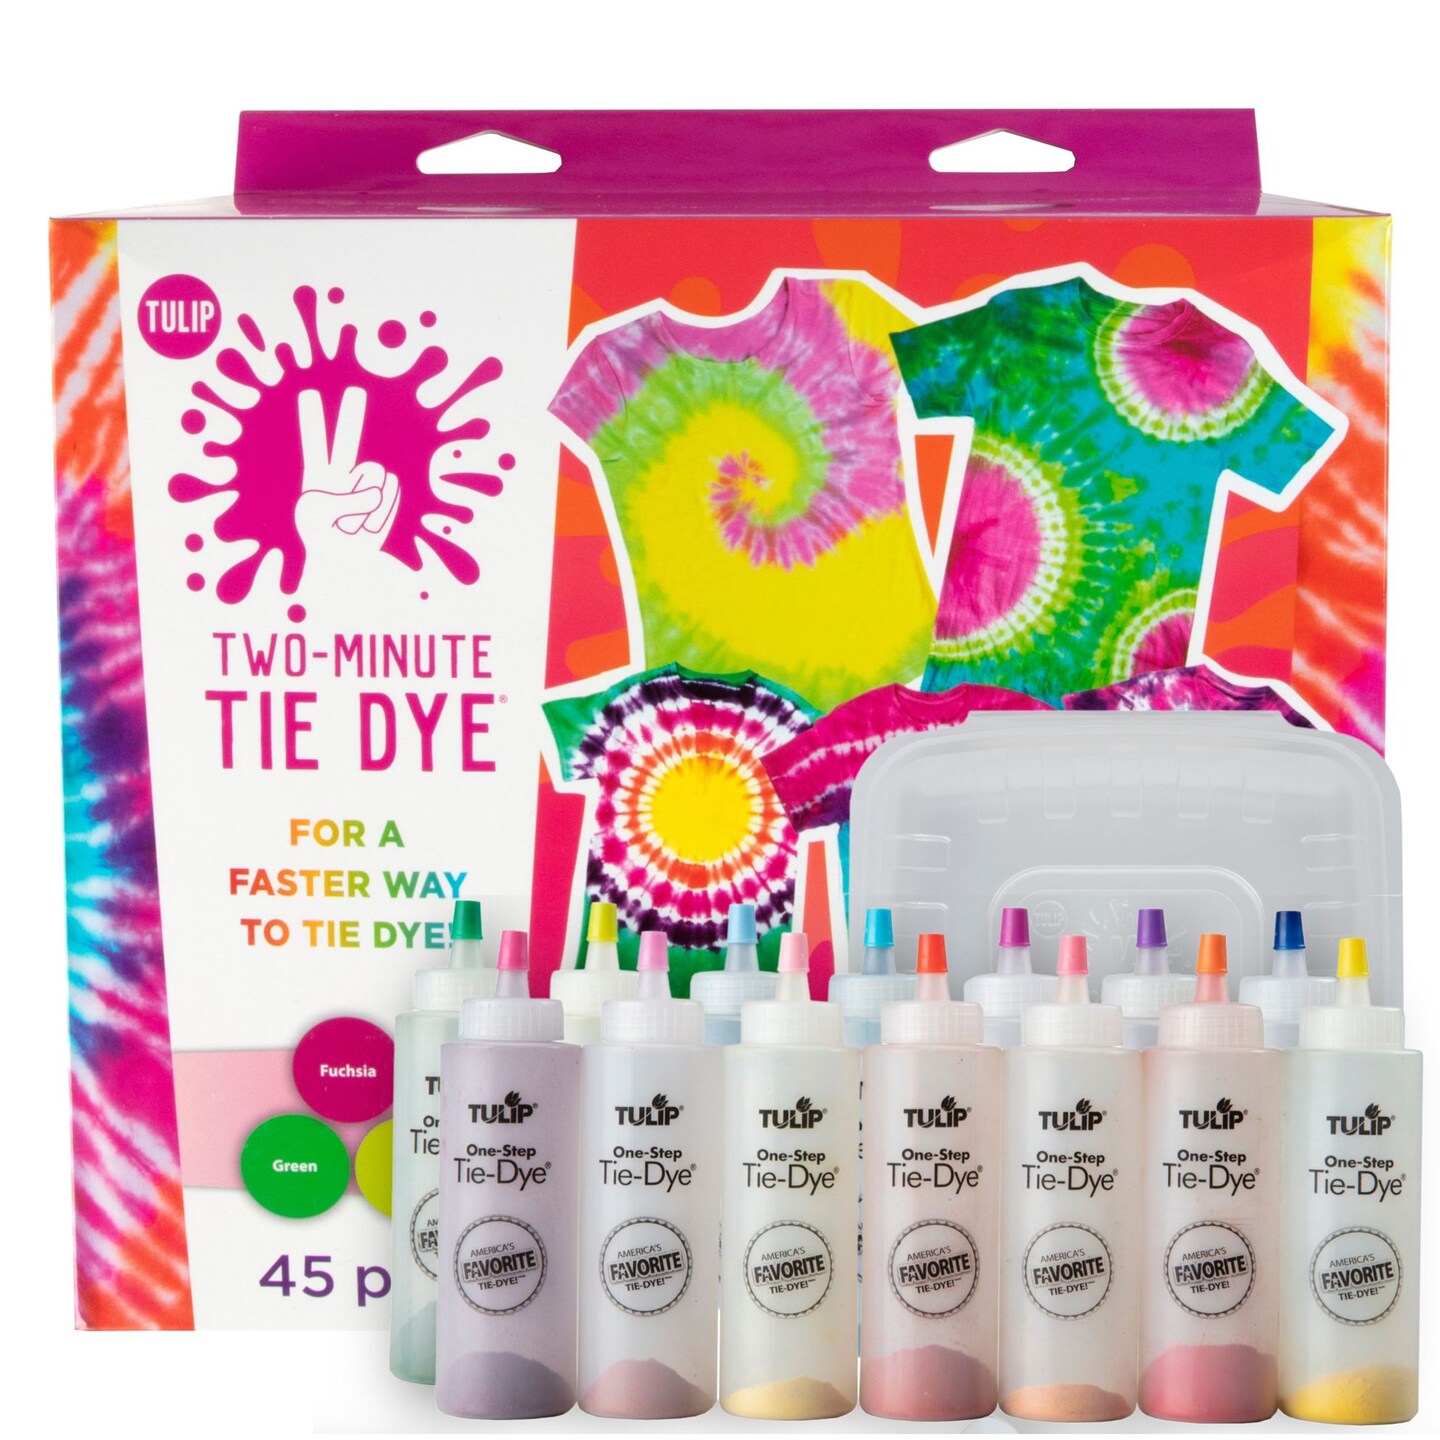 Tulip Two-Minute Tie Dye Extra-Large Kit